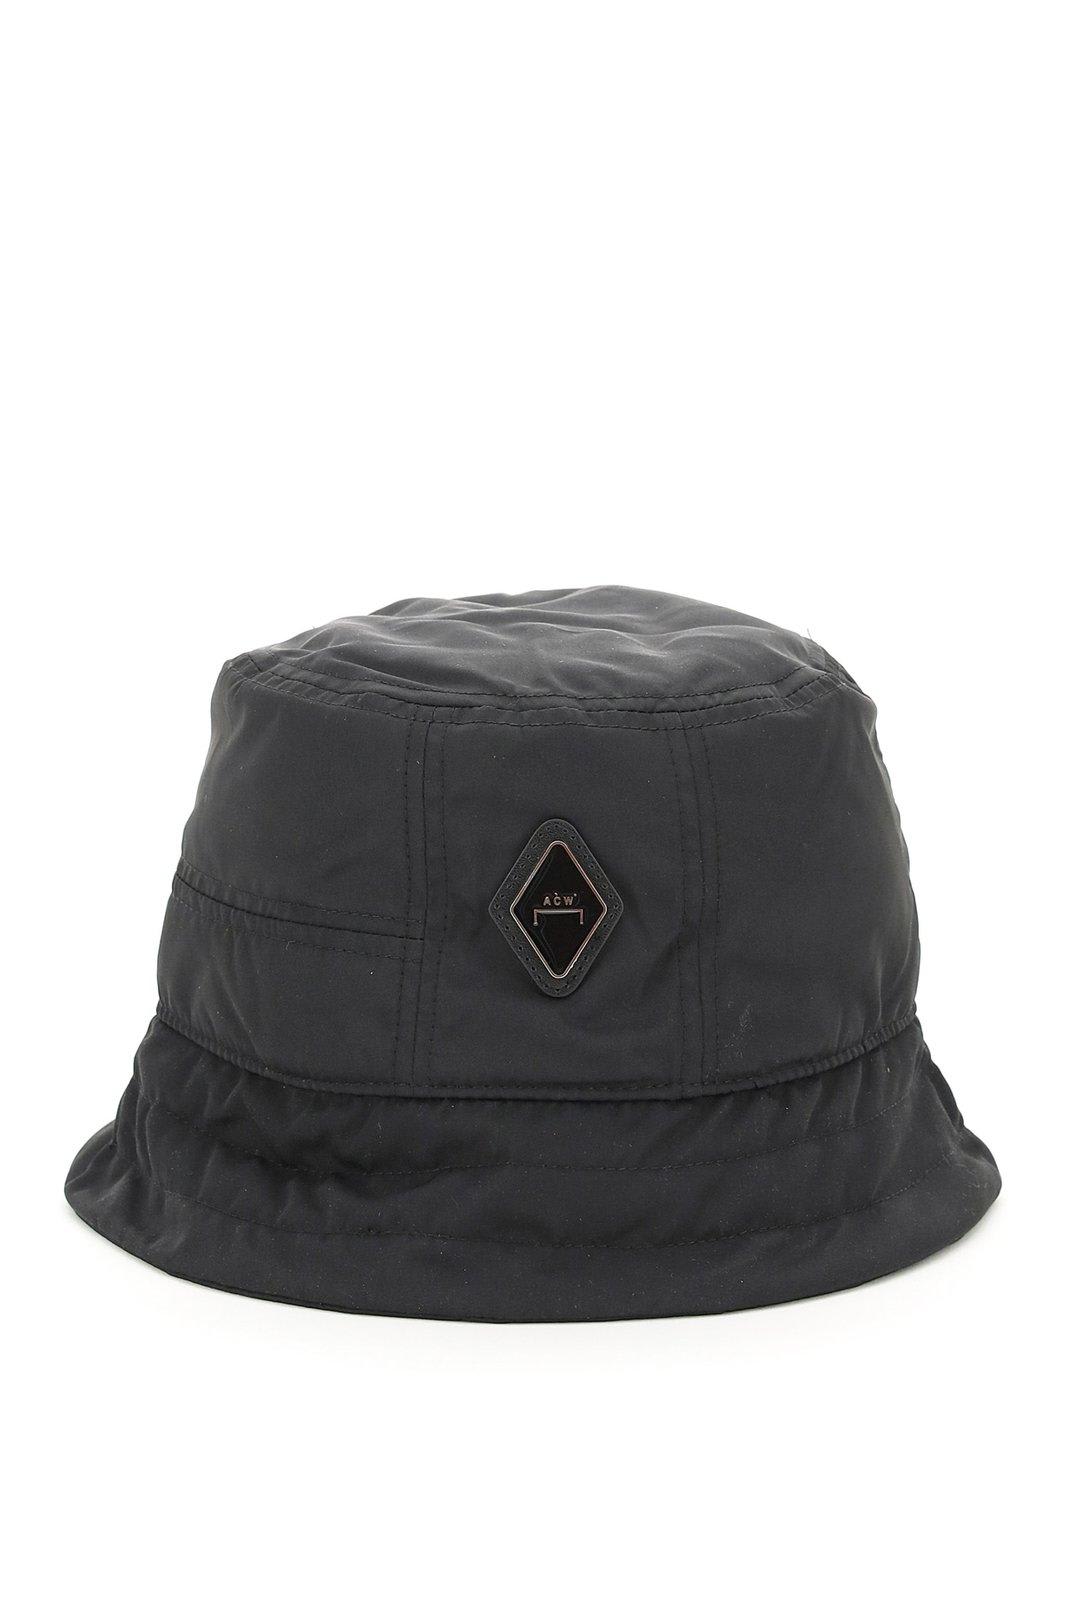 A-cold-wall* Logo Plaque Padded Bucket Hat In Black